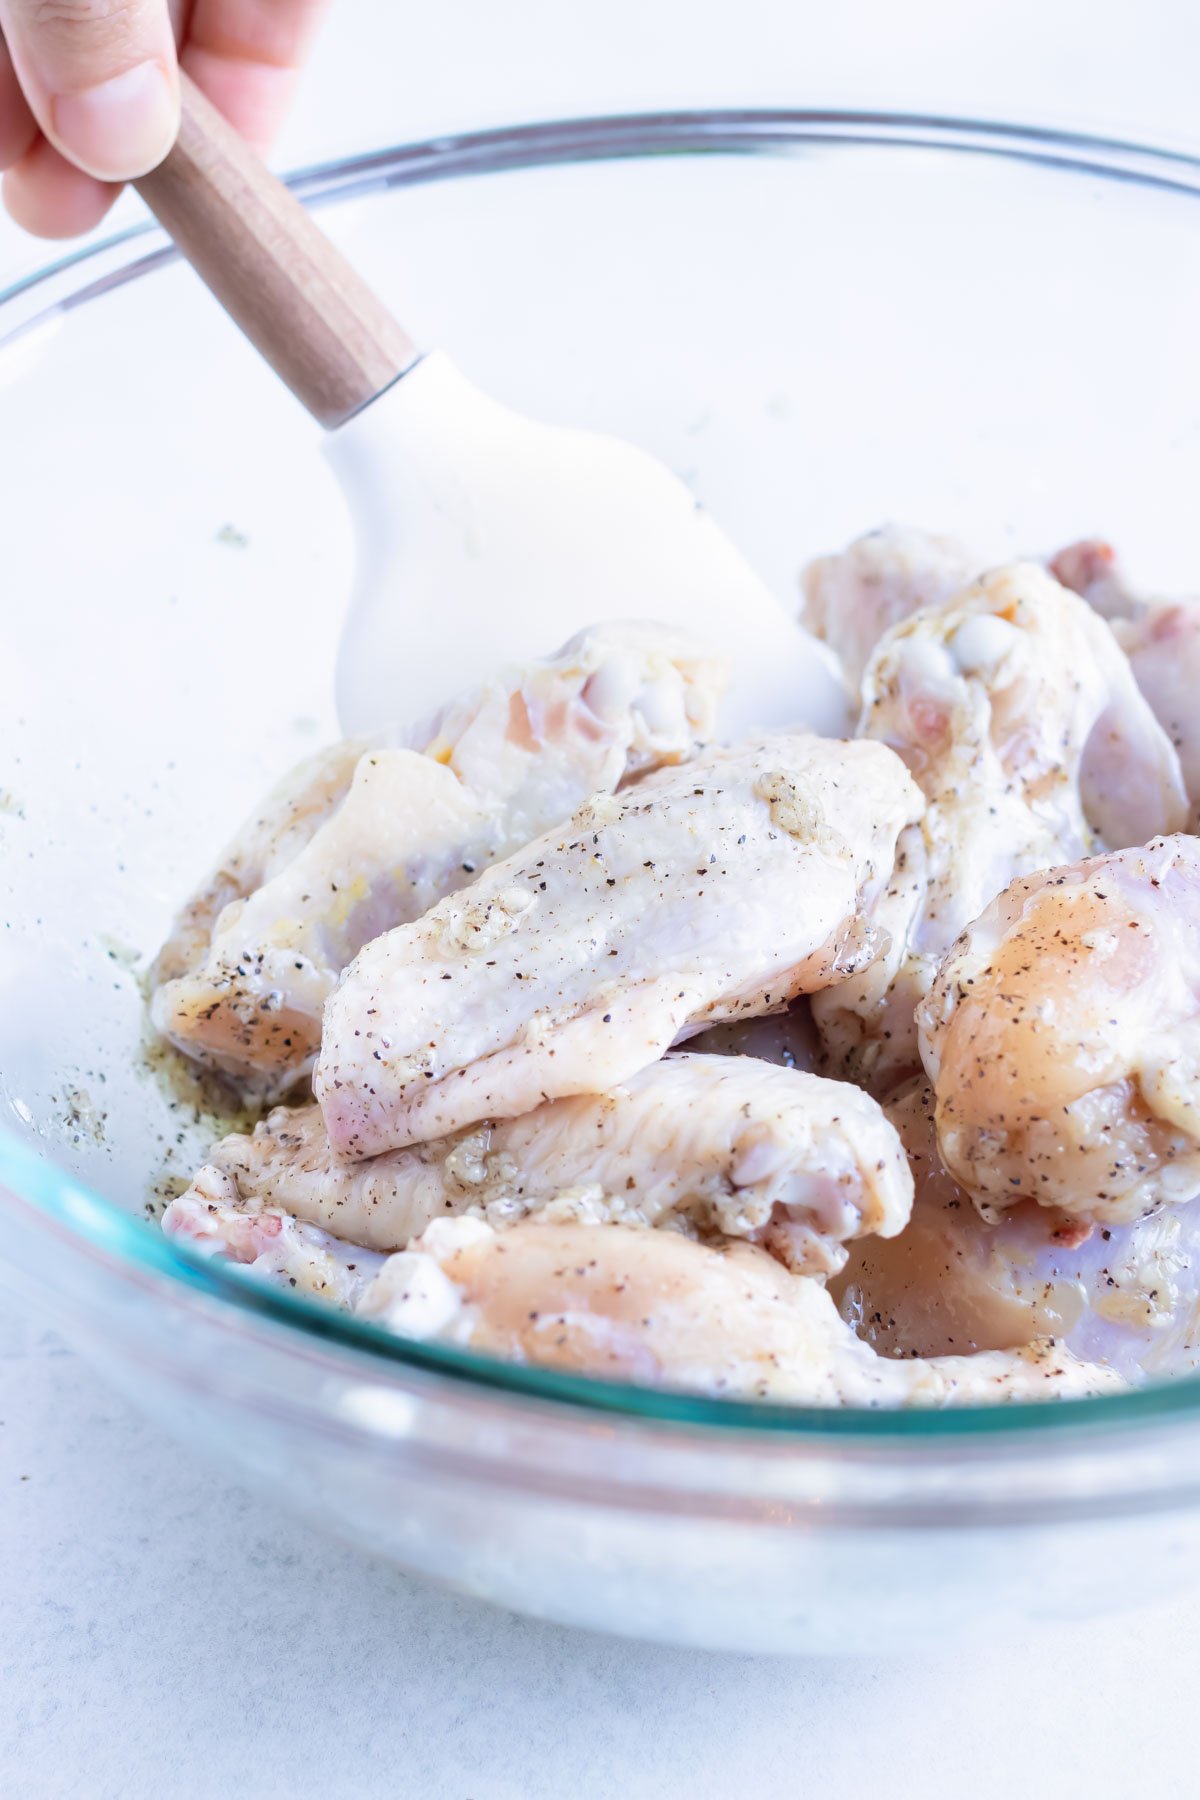 Raw chicken wings are coated in the oil and seasoning mixture.